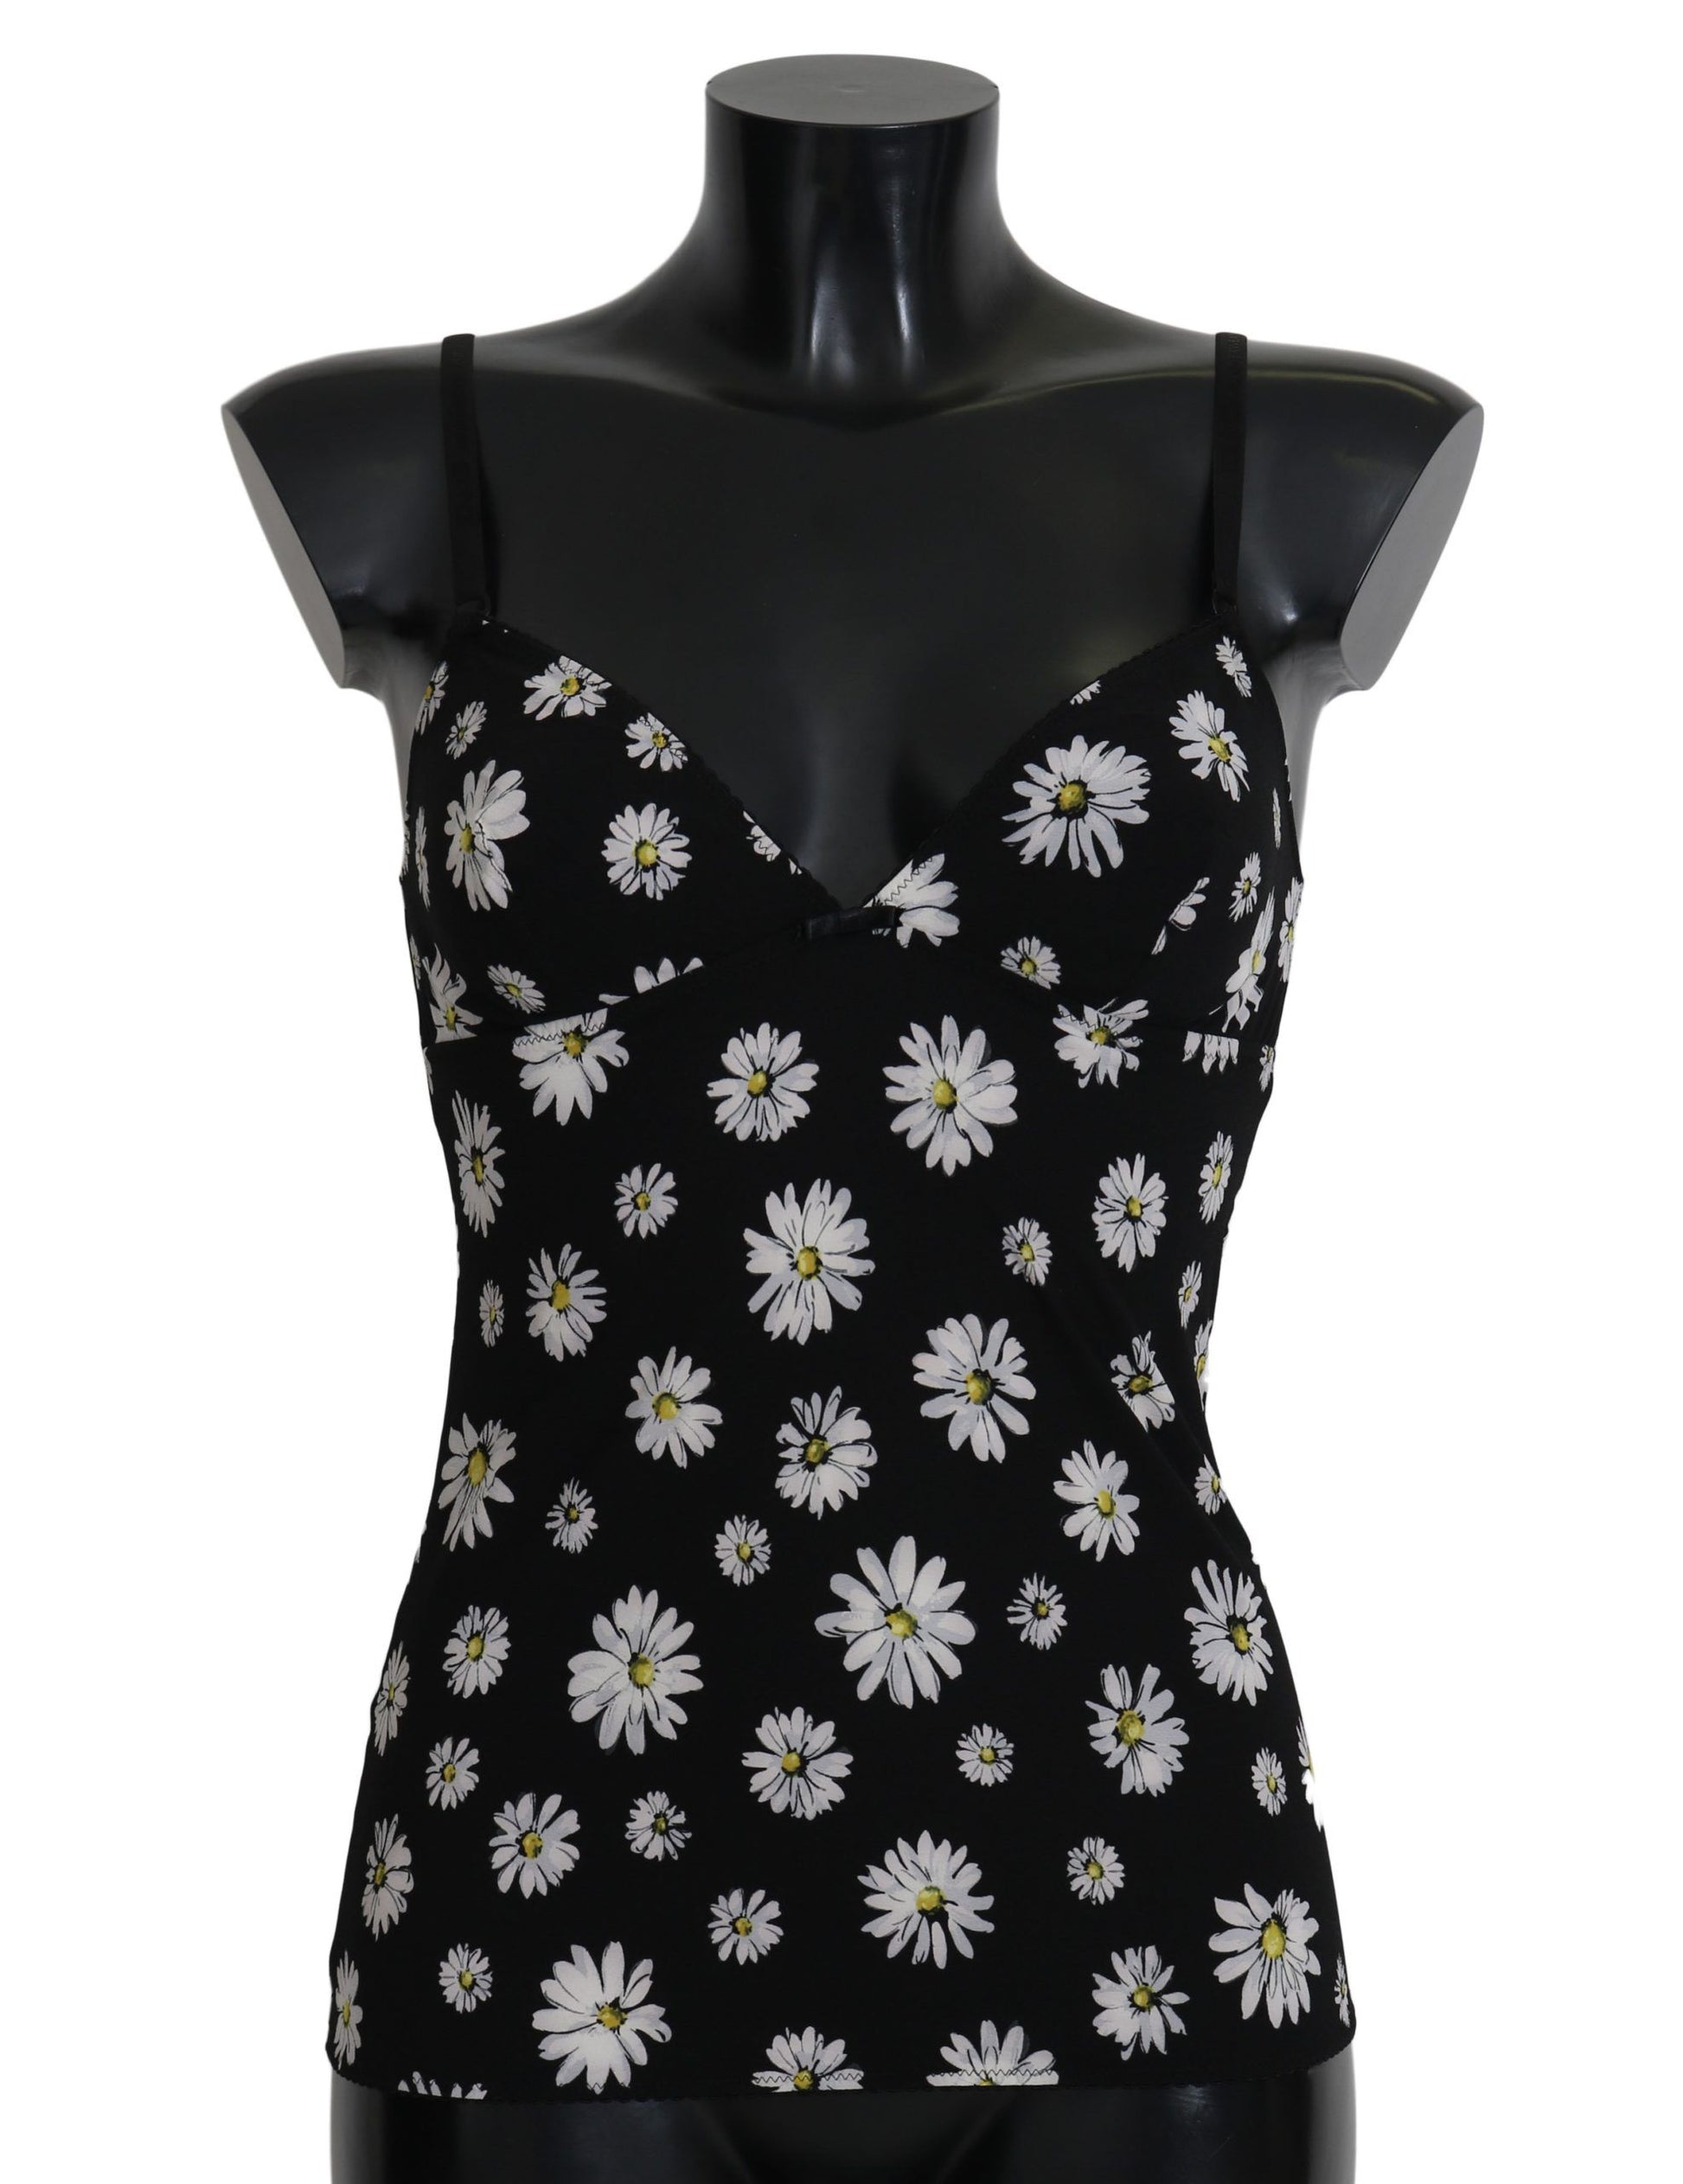 Black Daisy Print Dress Lingerie Chemisole - Designed by Dolce & Gabbana Available to Buy at a Discounted Price on Moon Behind The Hill Online Designer Discount Store